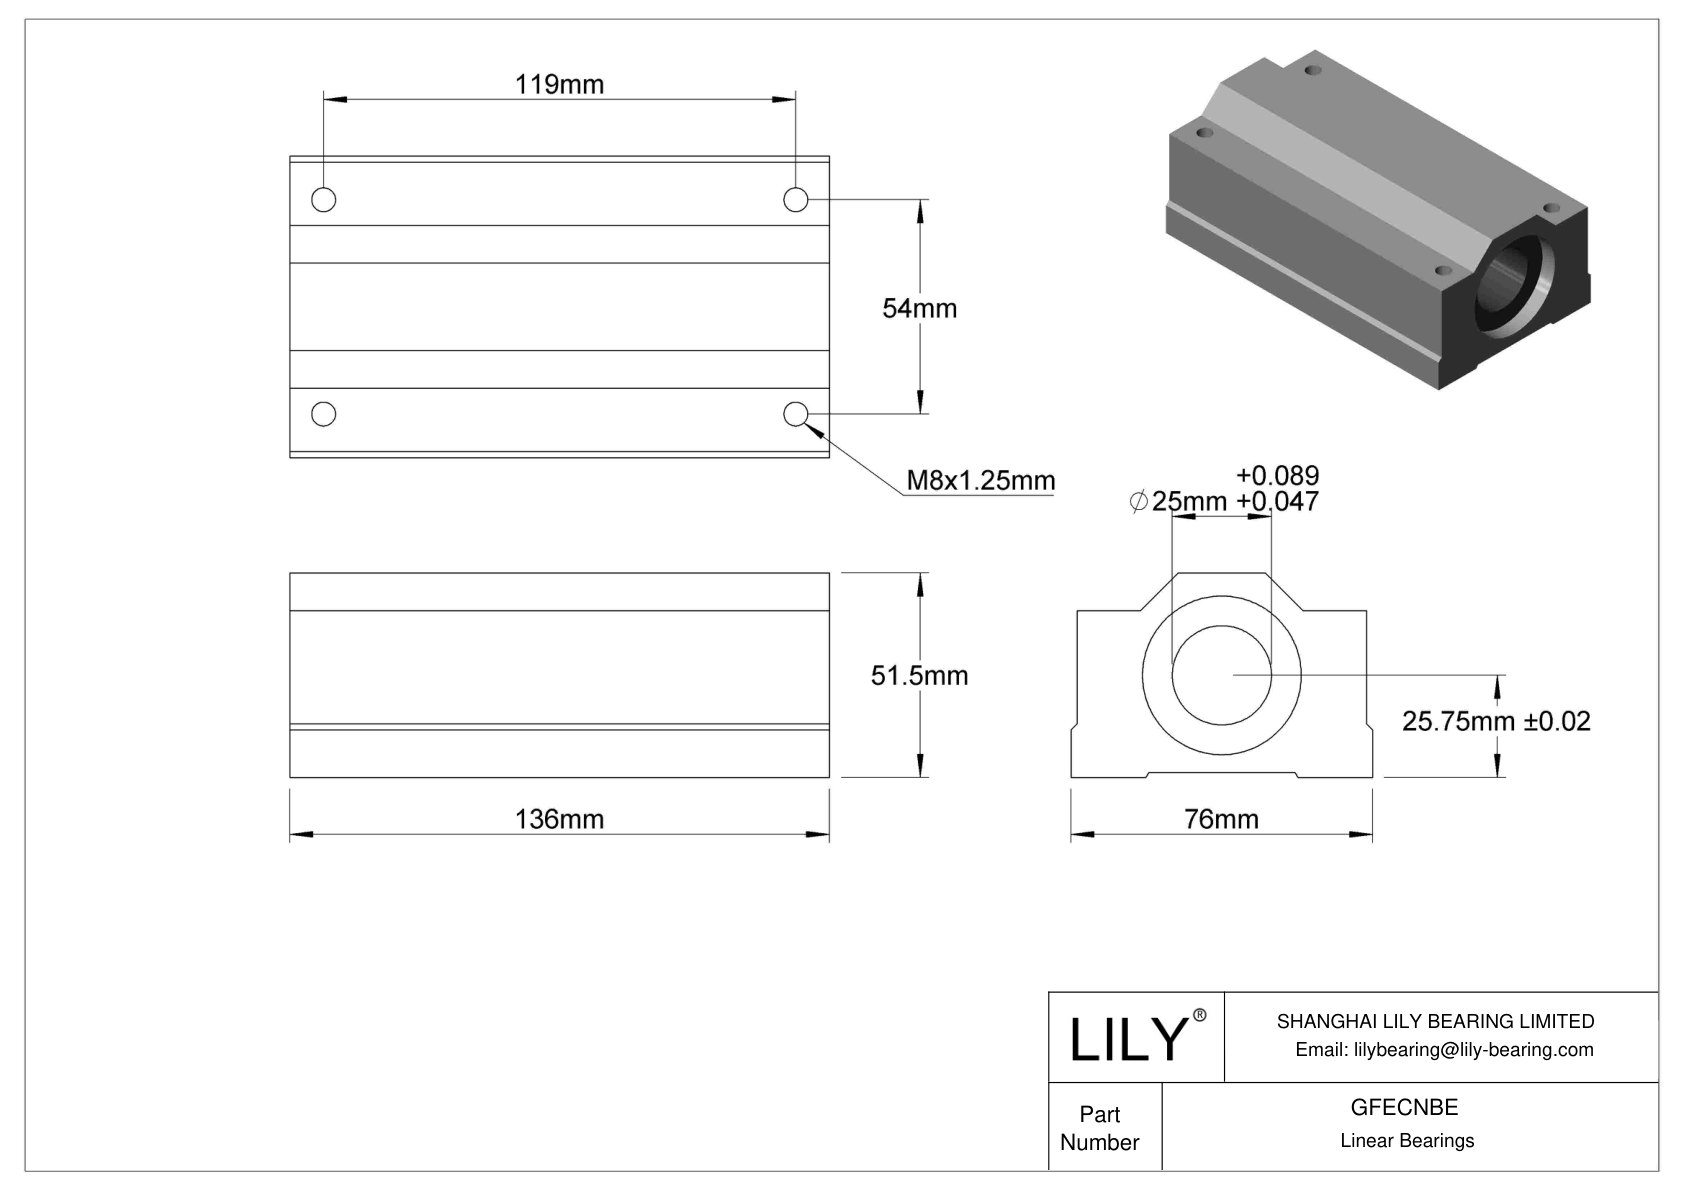 GFECNBE High-Load Mounted Linear Sleeve Bearings cad drawing